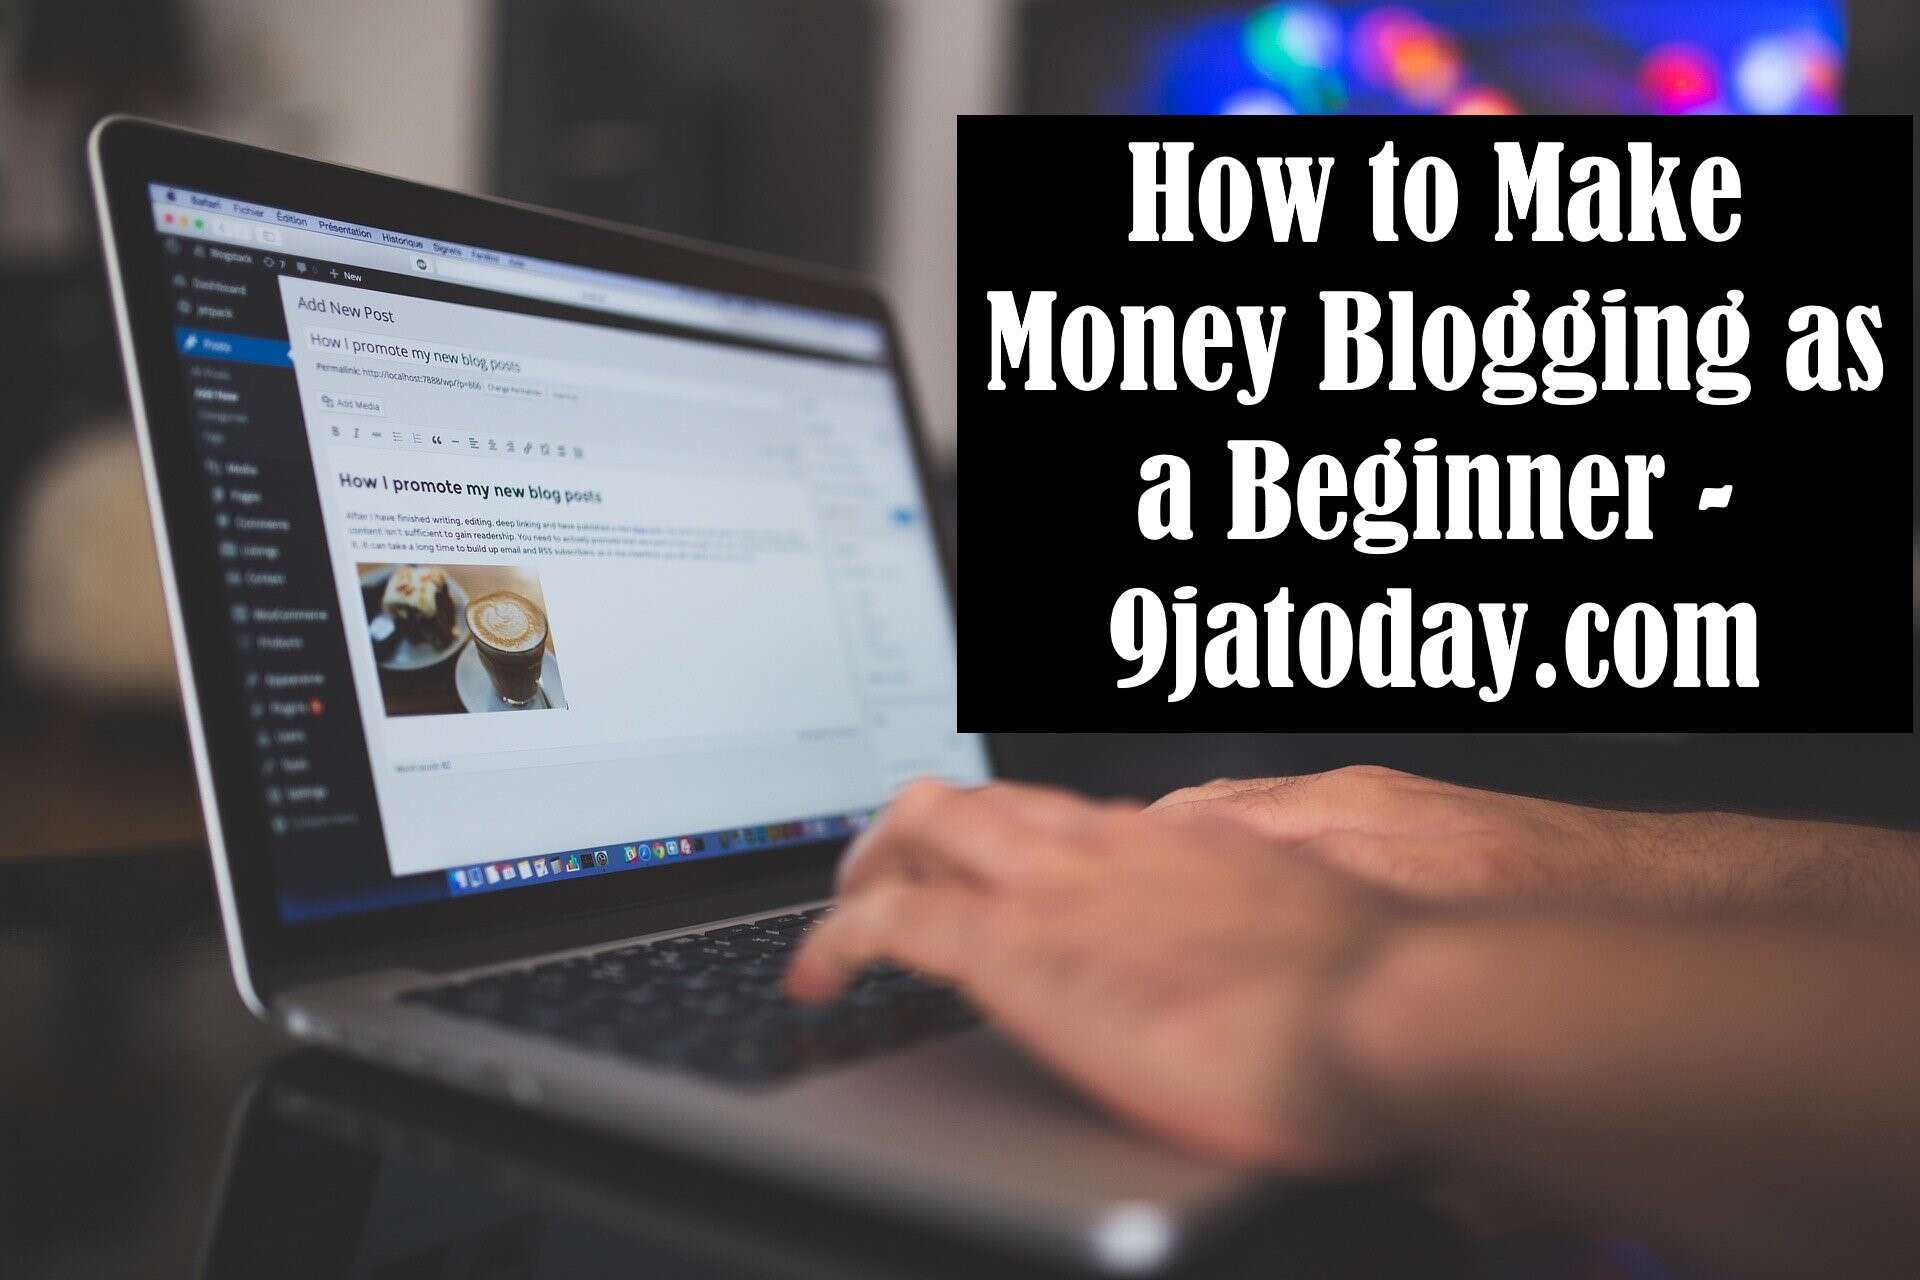 How to Make Money Blogging as a Beginner